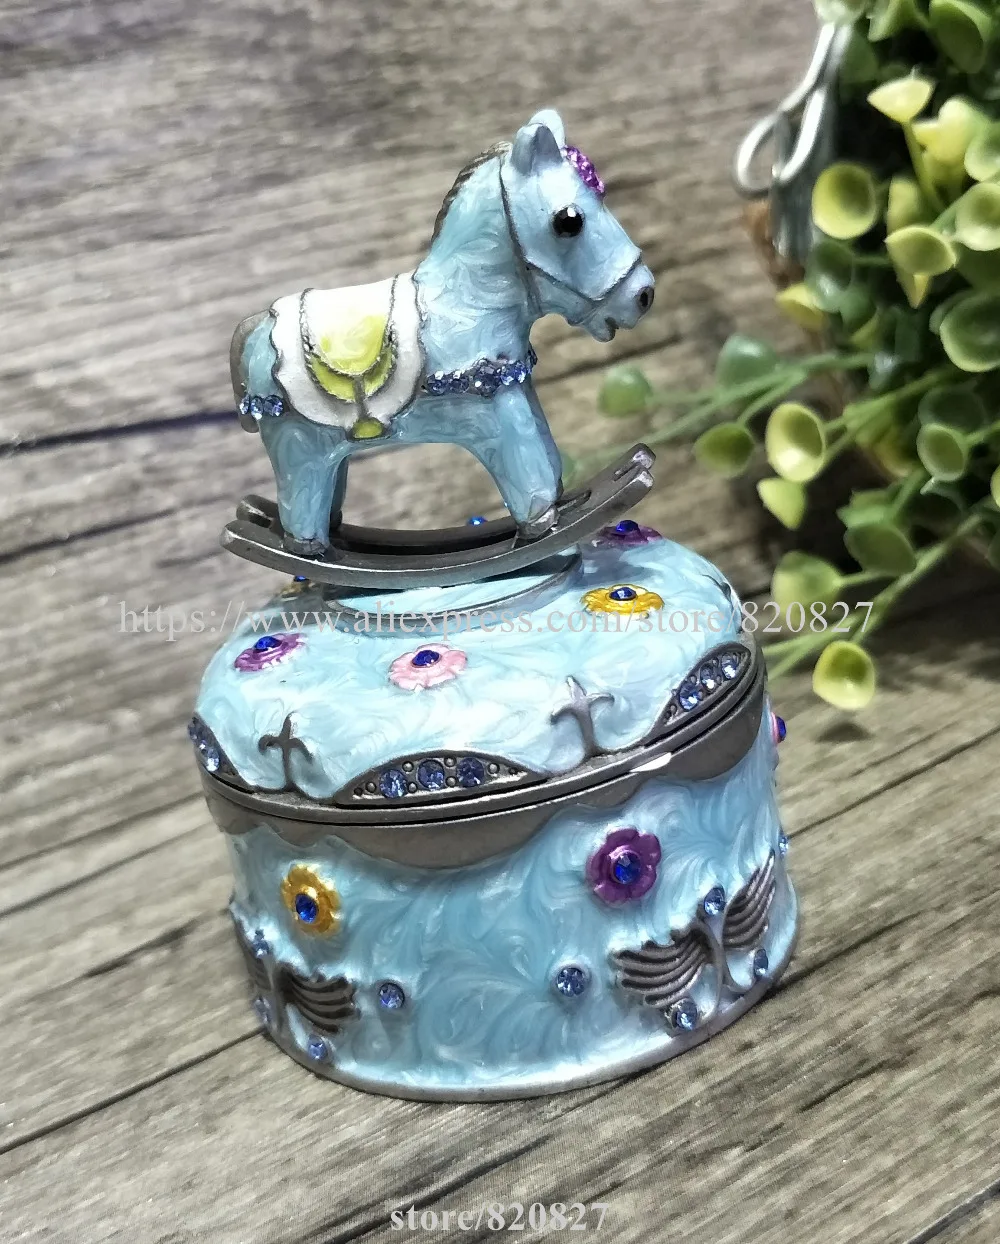 Small Cute Horse on Lid Jewelled Trinket Box Jewelry Box Newest Ring Holder Earring Jewelry Round Storage Box Wedding Souvenirs lovely newest hot cute pig cosmetic jewelry trinket gift storage box accessories ornaments box pink 7 8 5 5 5 3 cm